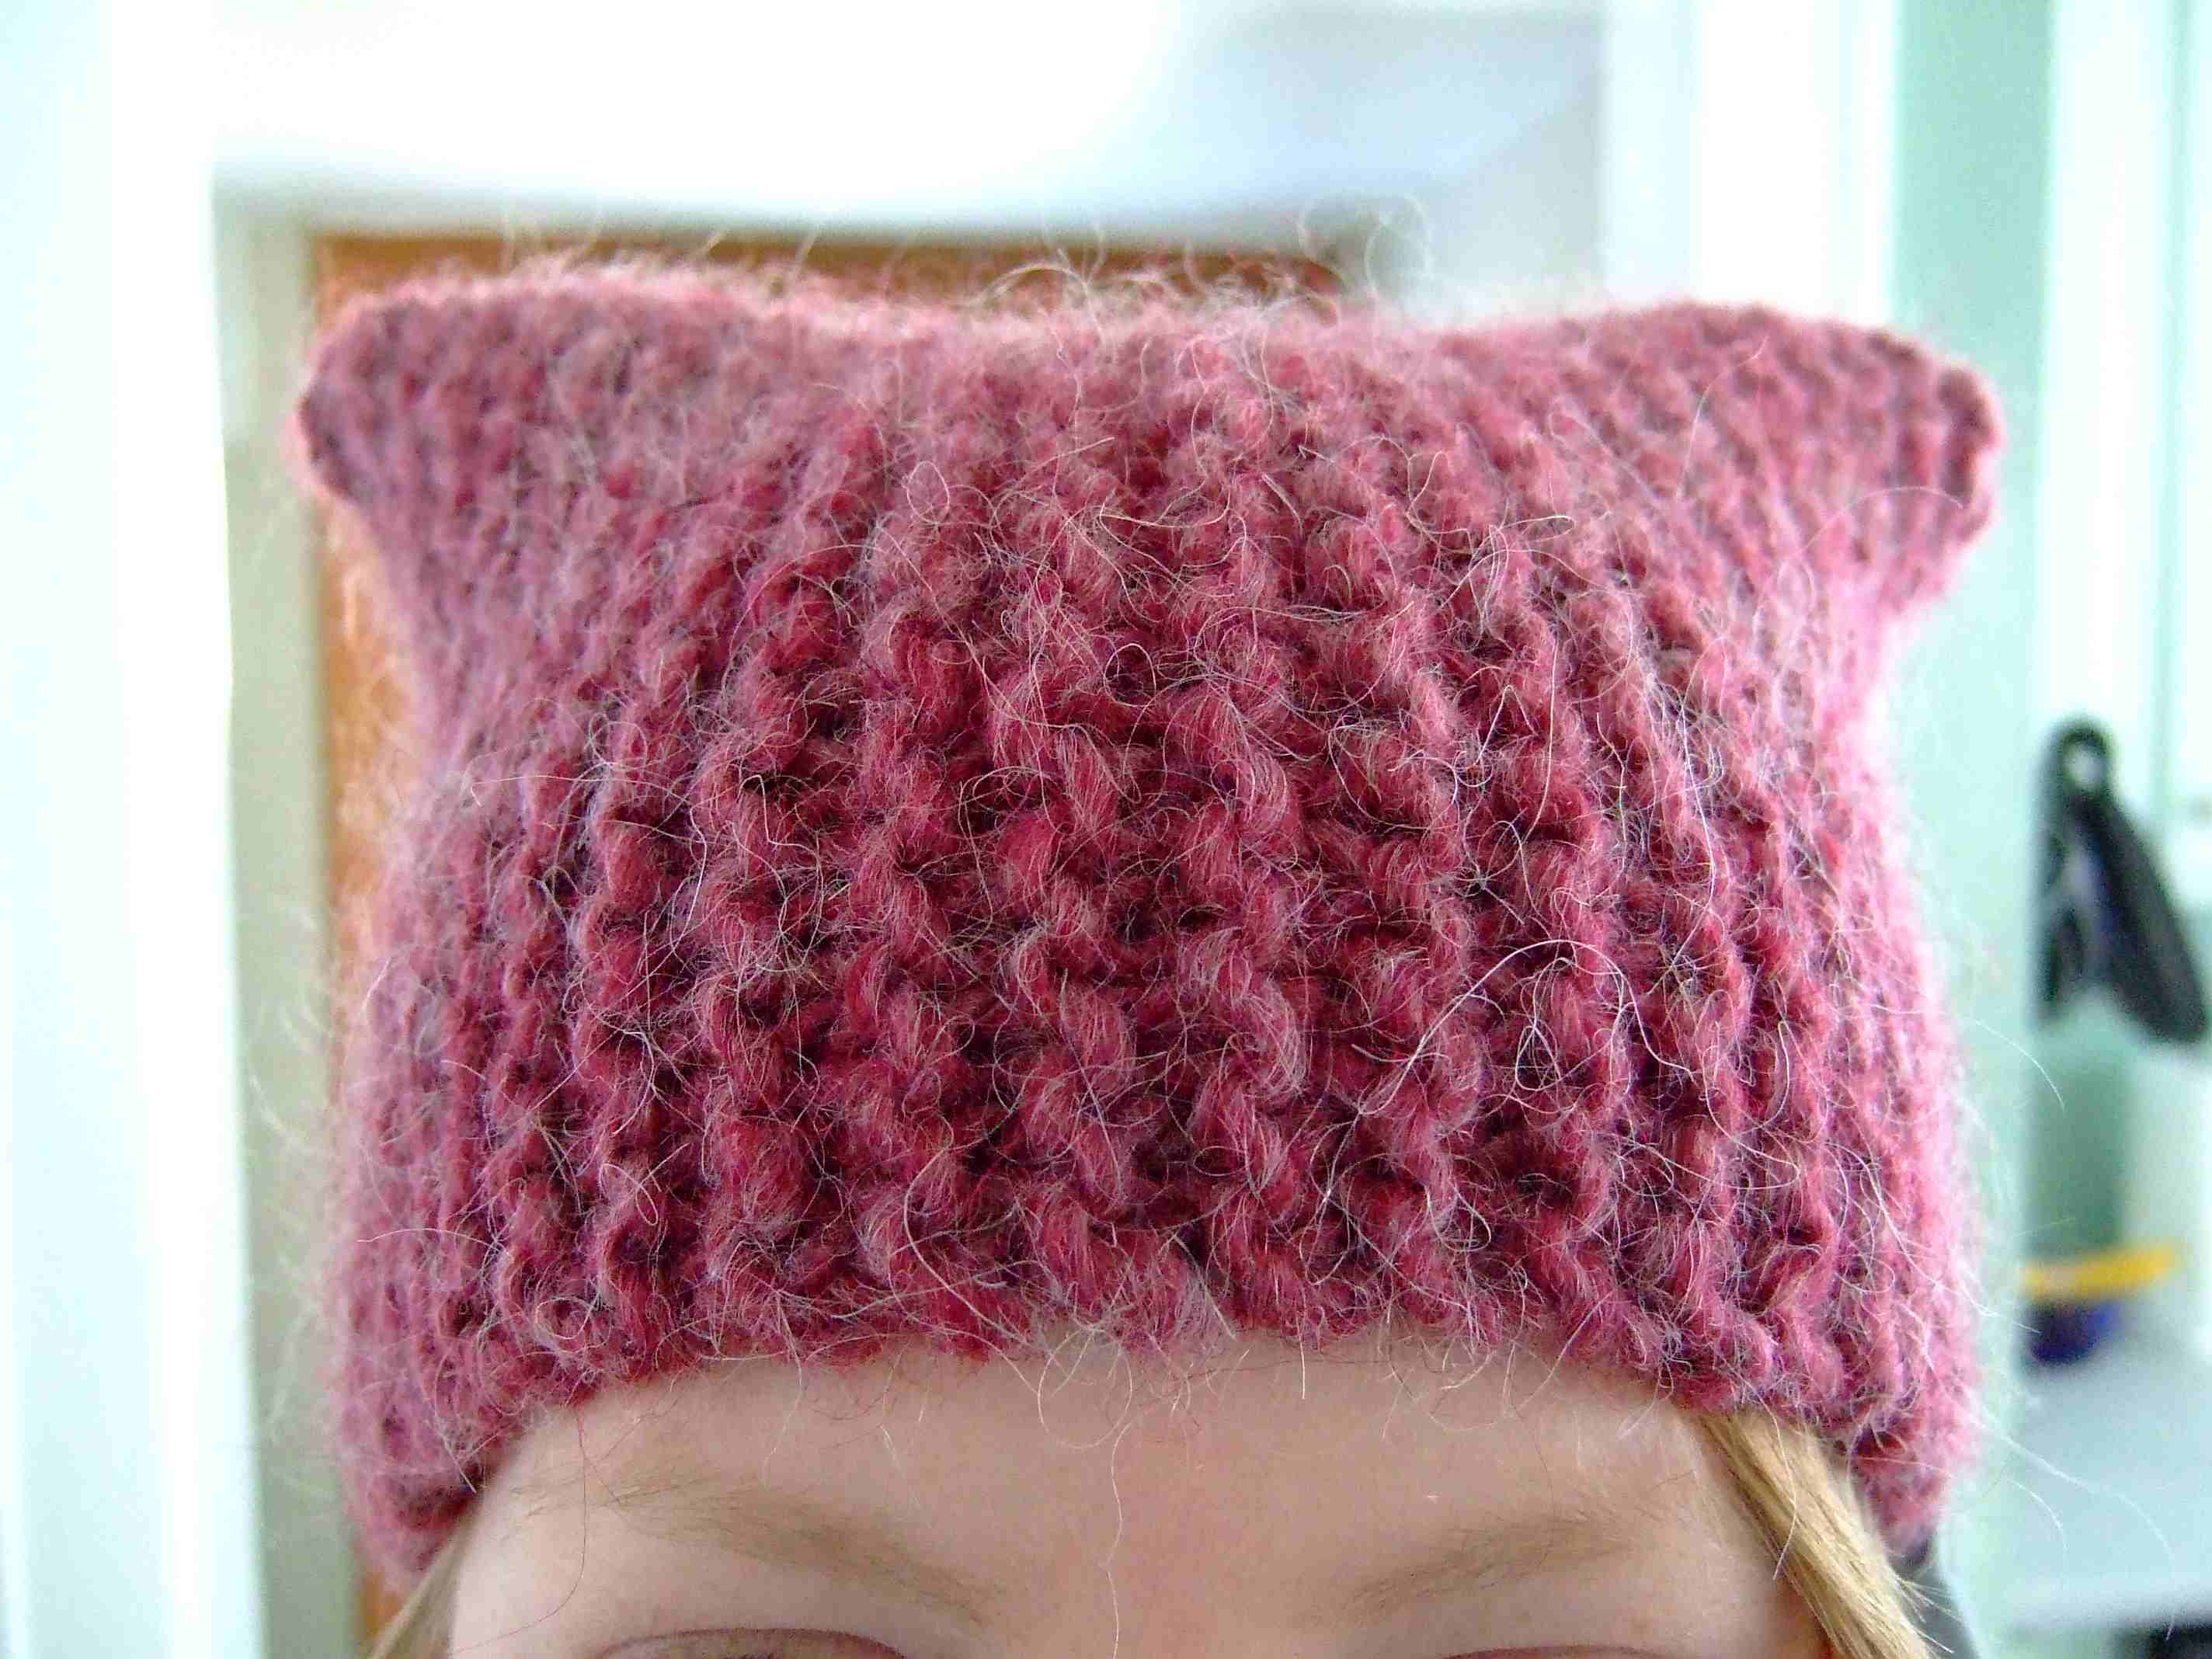 Easy Free Pattern for a Child&apos;s Knitted Hat - Yahoo! Voices